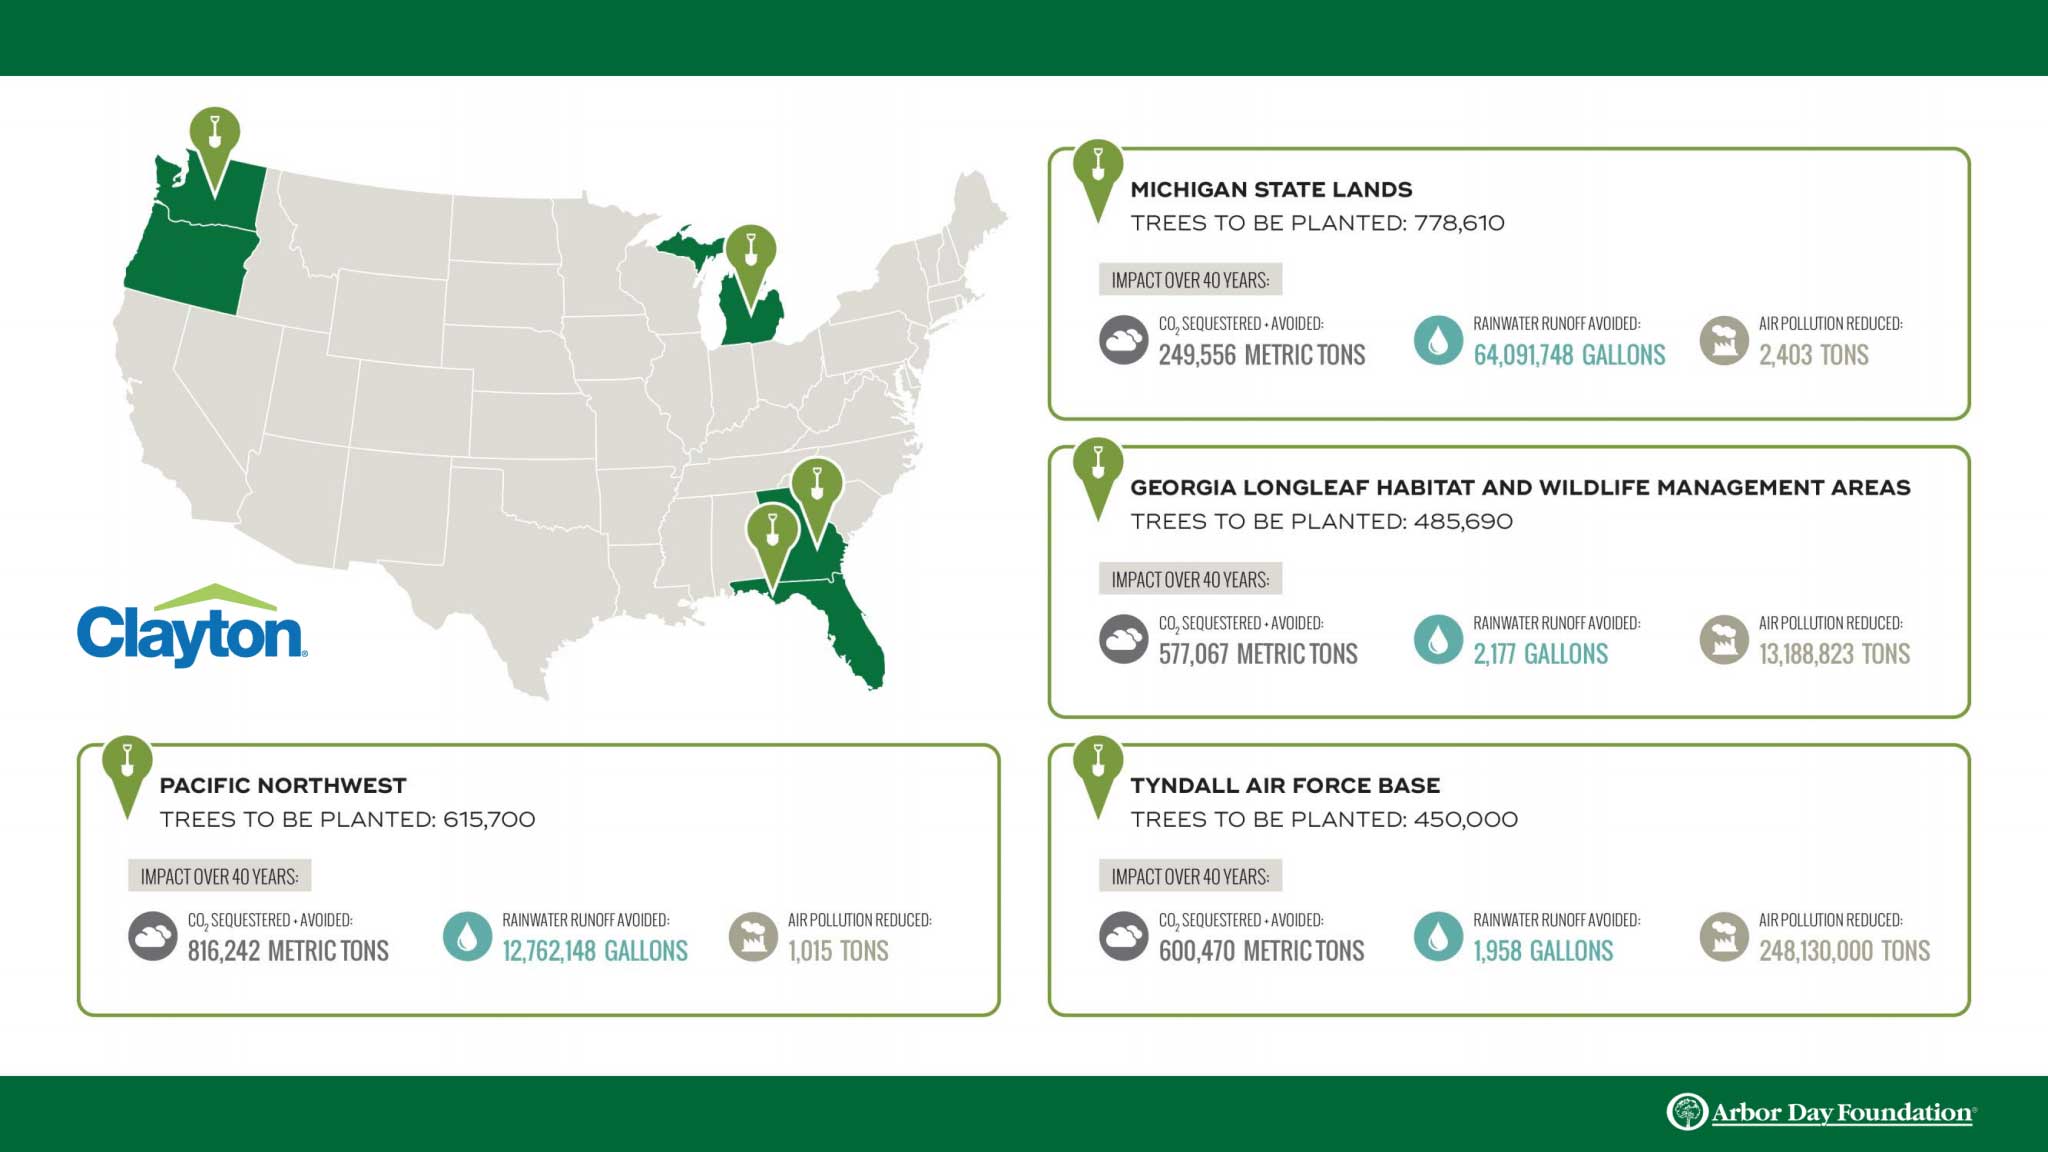 The partnership between Clayton and the Arbor Day Foundation will aid in restoring and revitalizing forests in the Pacific Northwest, Michigan State lands, Georgia and Tyndall Airforce Base, as shown in this graphic.